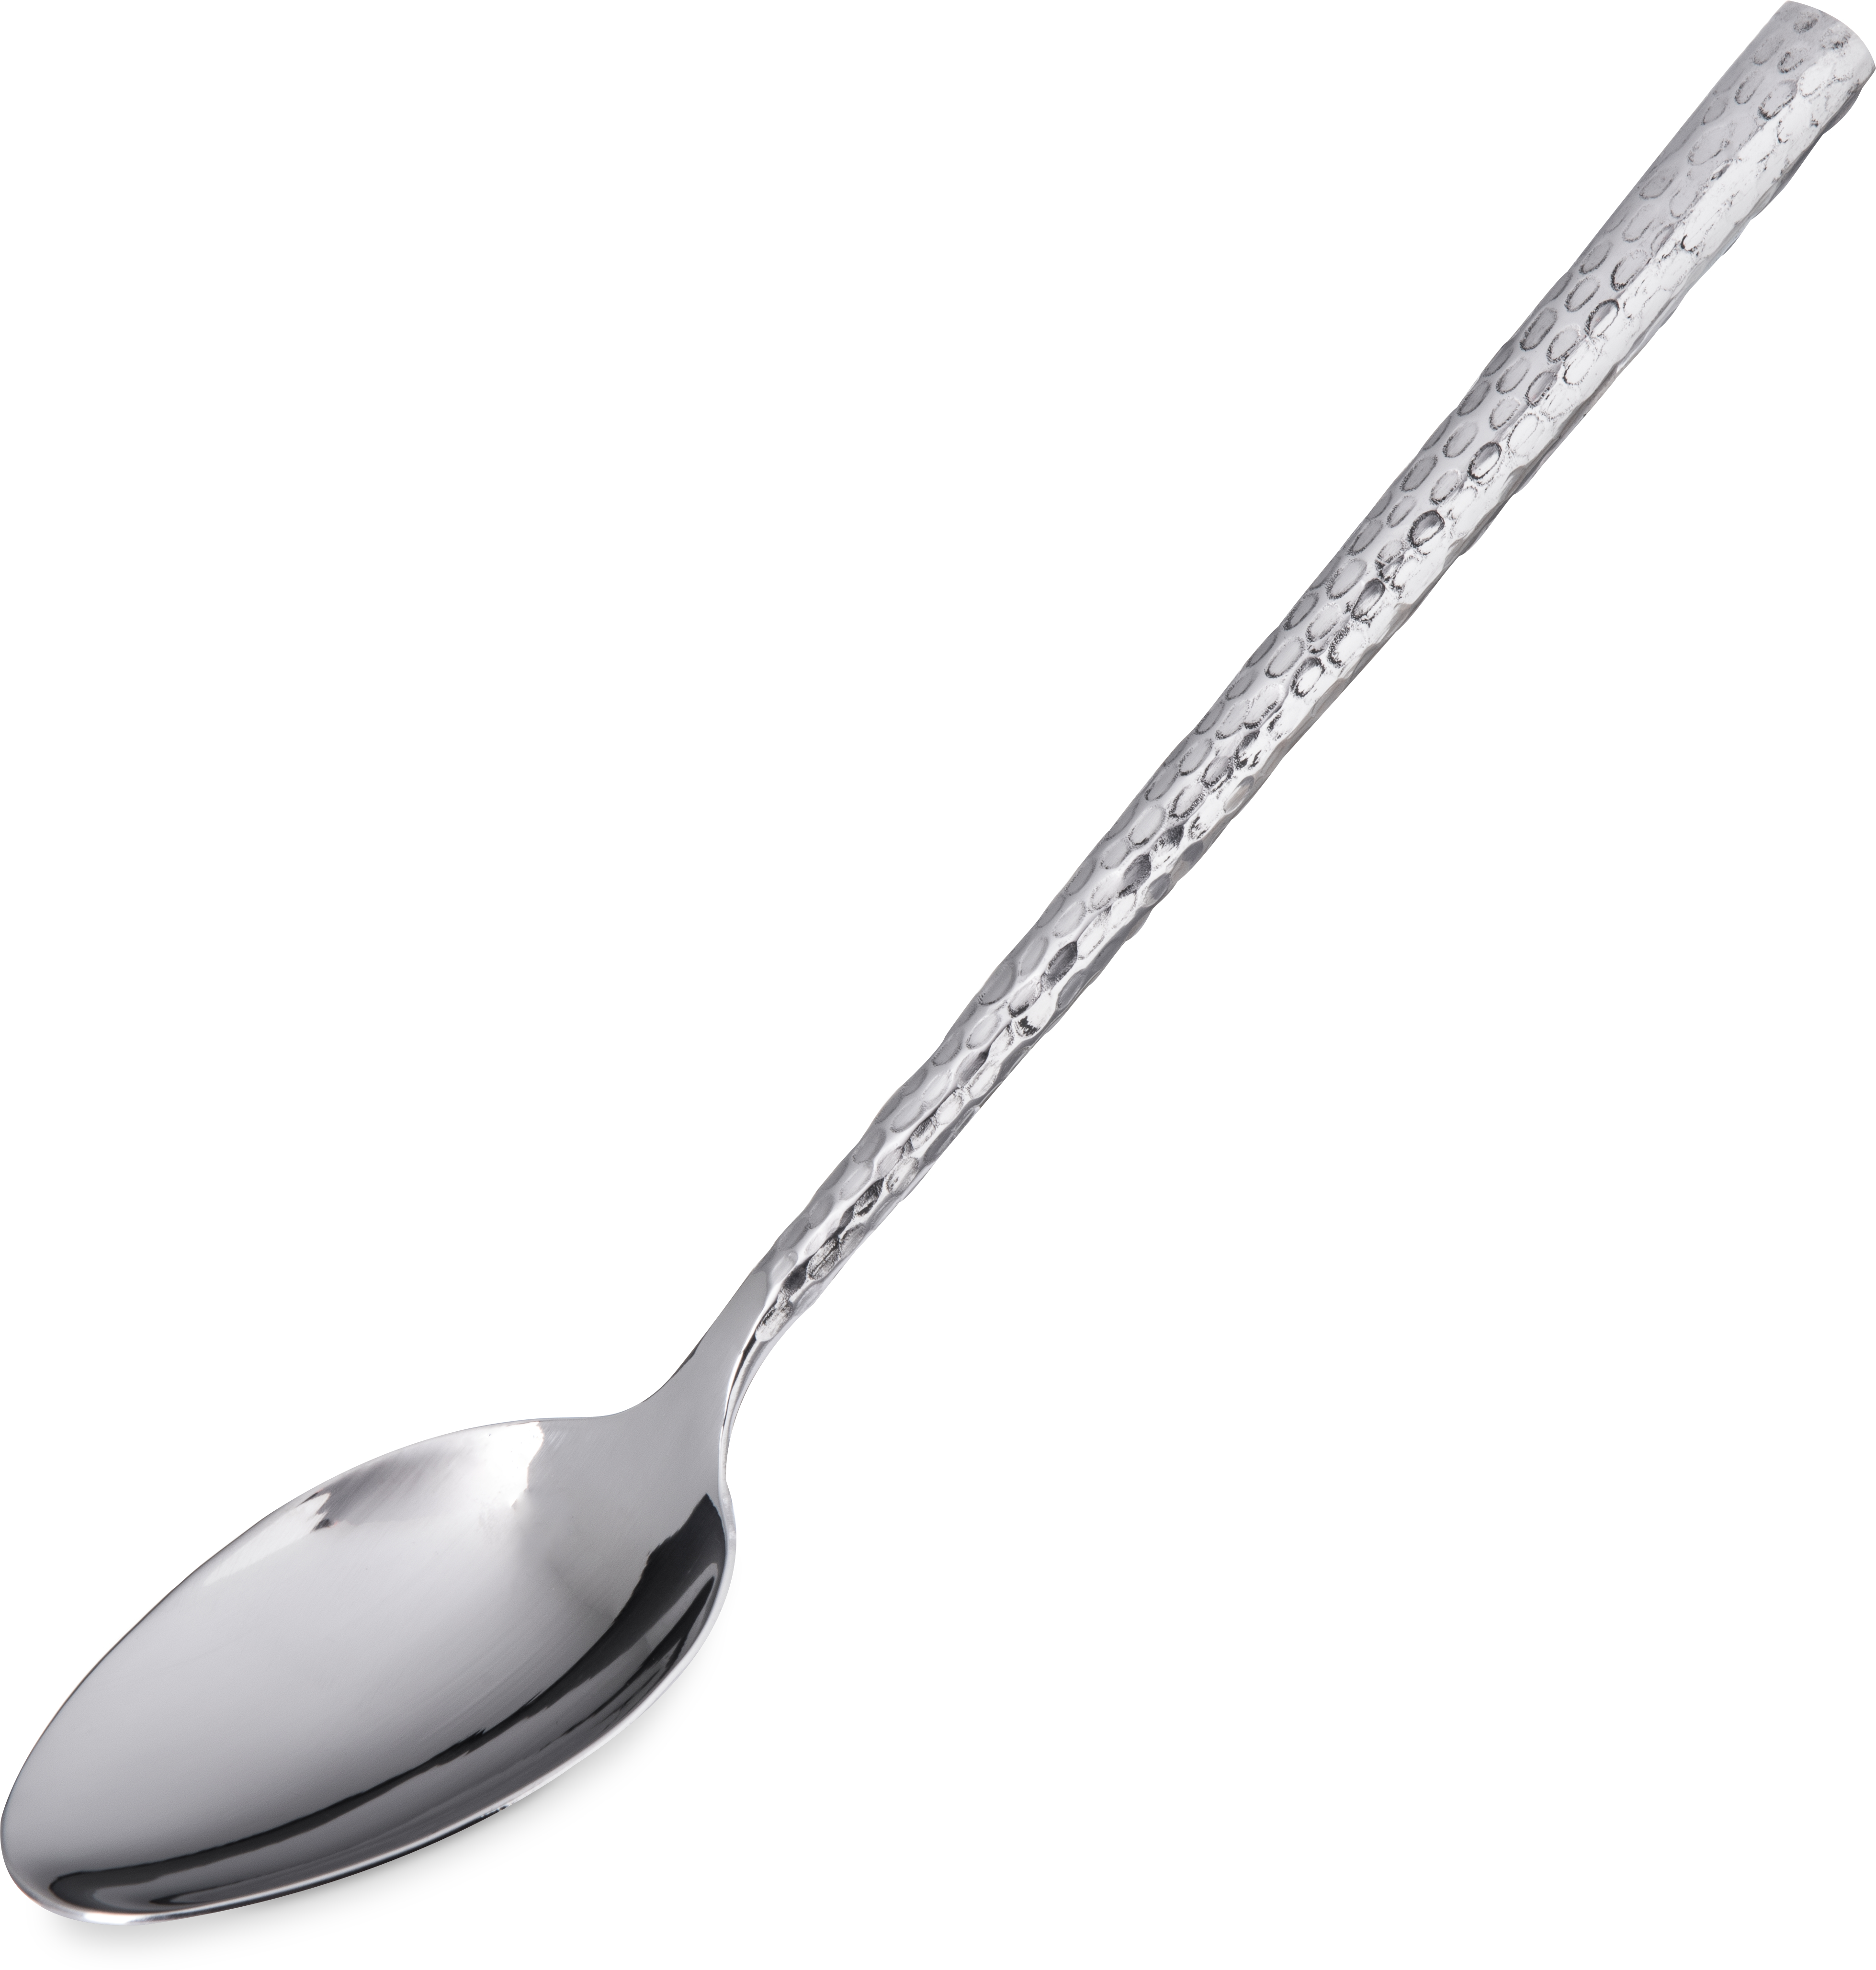 Terra Solid Spoon 10 - Hammered Mirror Finish - Stainless Steel